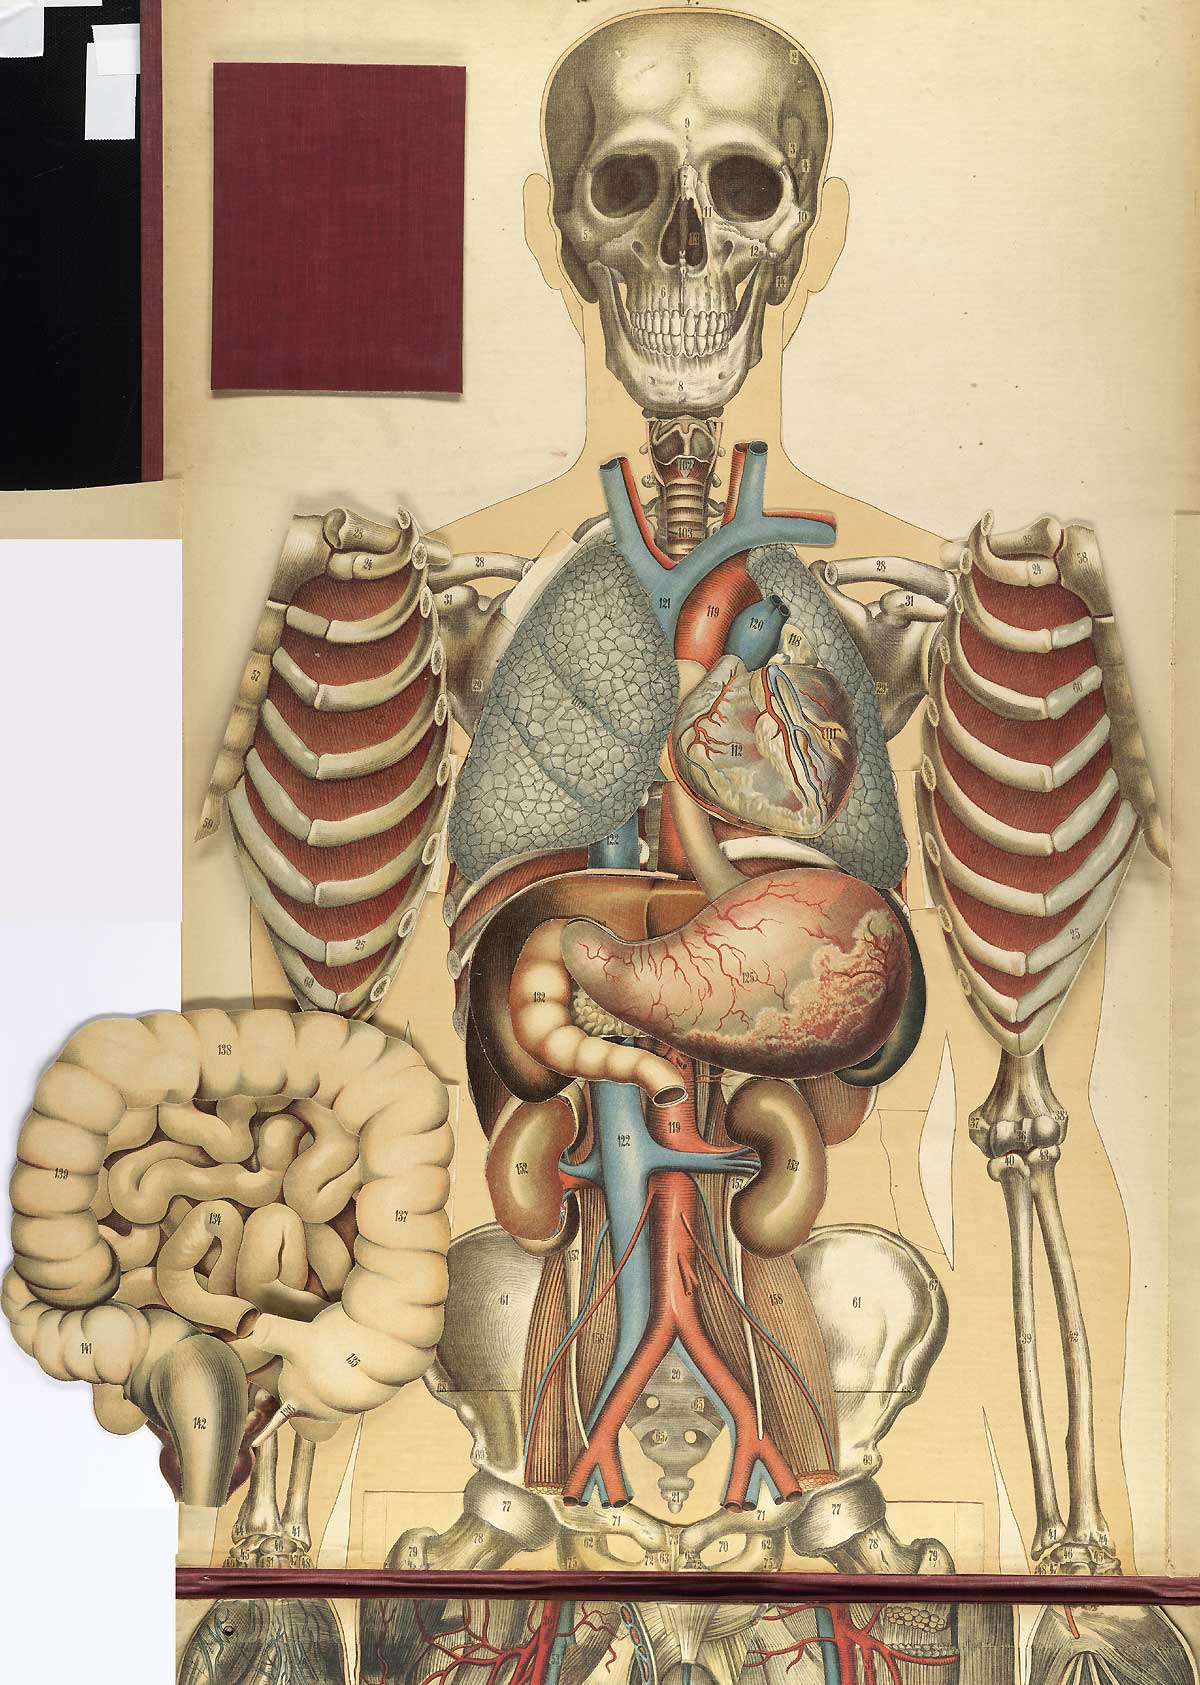 Chromolithograph showing the internal organs of the upper half of the front of the human body, including the stomach, intestines, lungs, heart, and kidneys, from Julien Bouglé’s Le corps humain en grandeur naturelle, NLM Call no. WE B758c 1899.